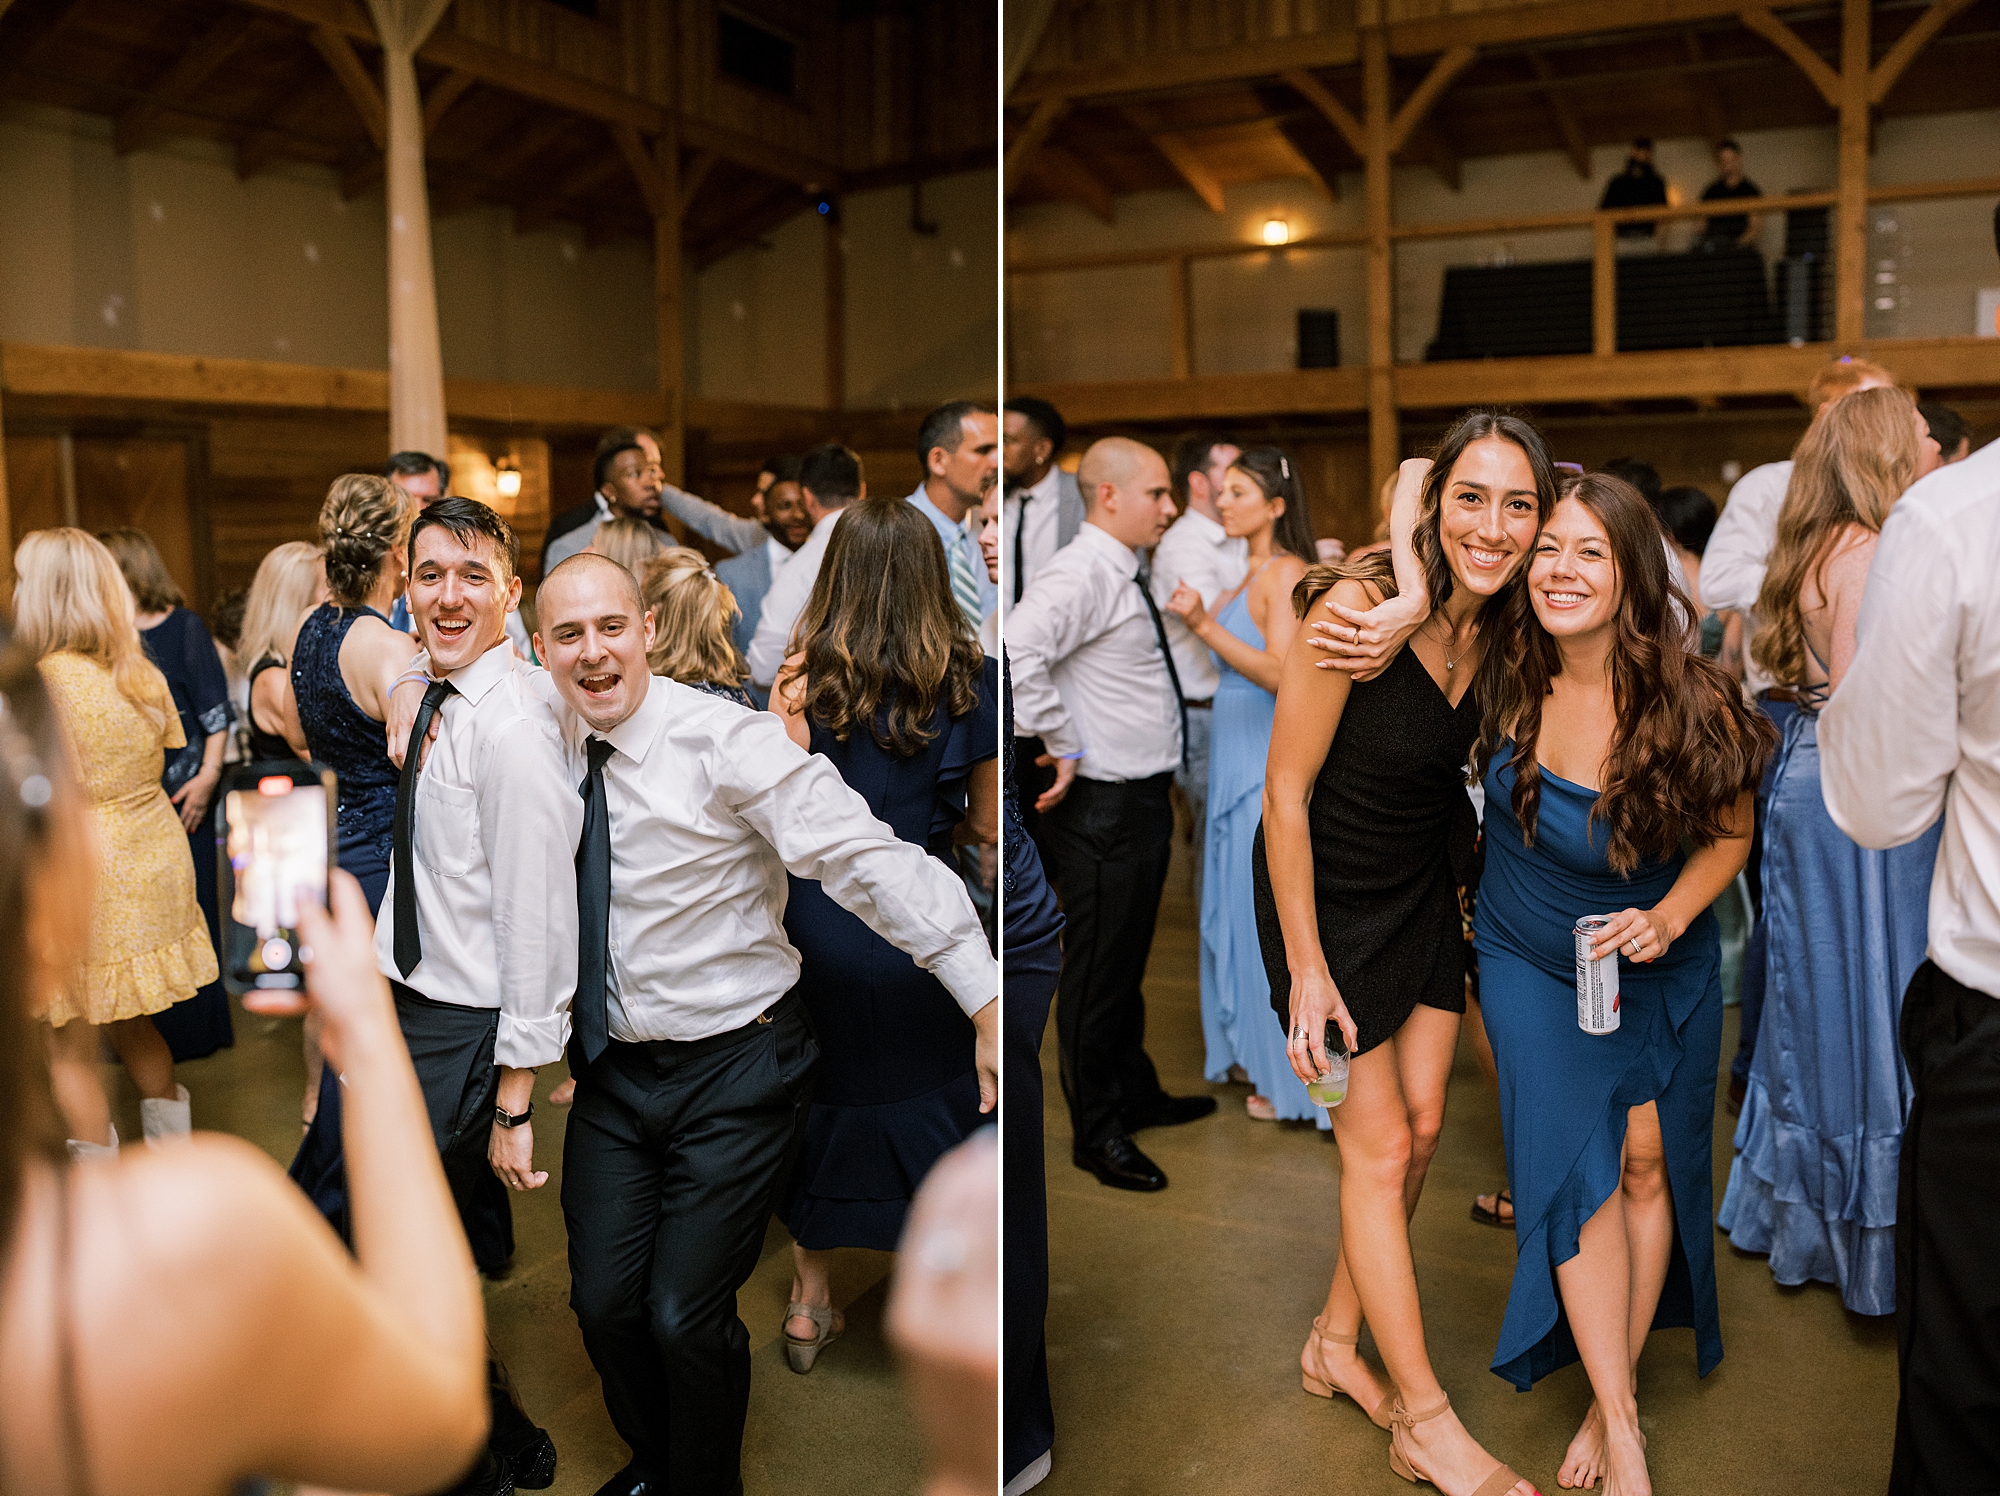 wedding guests celebrate at Dreamy Summer Wedding reception at The Barn at Sycamore Farms